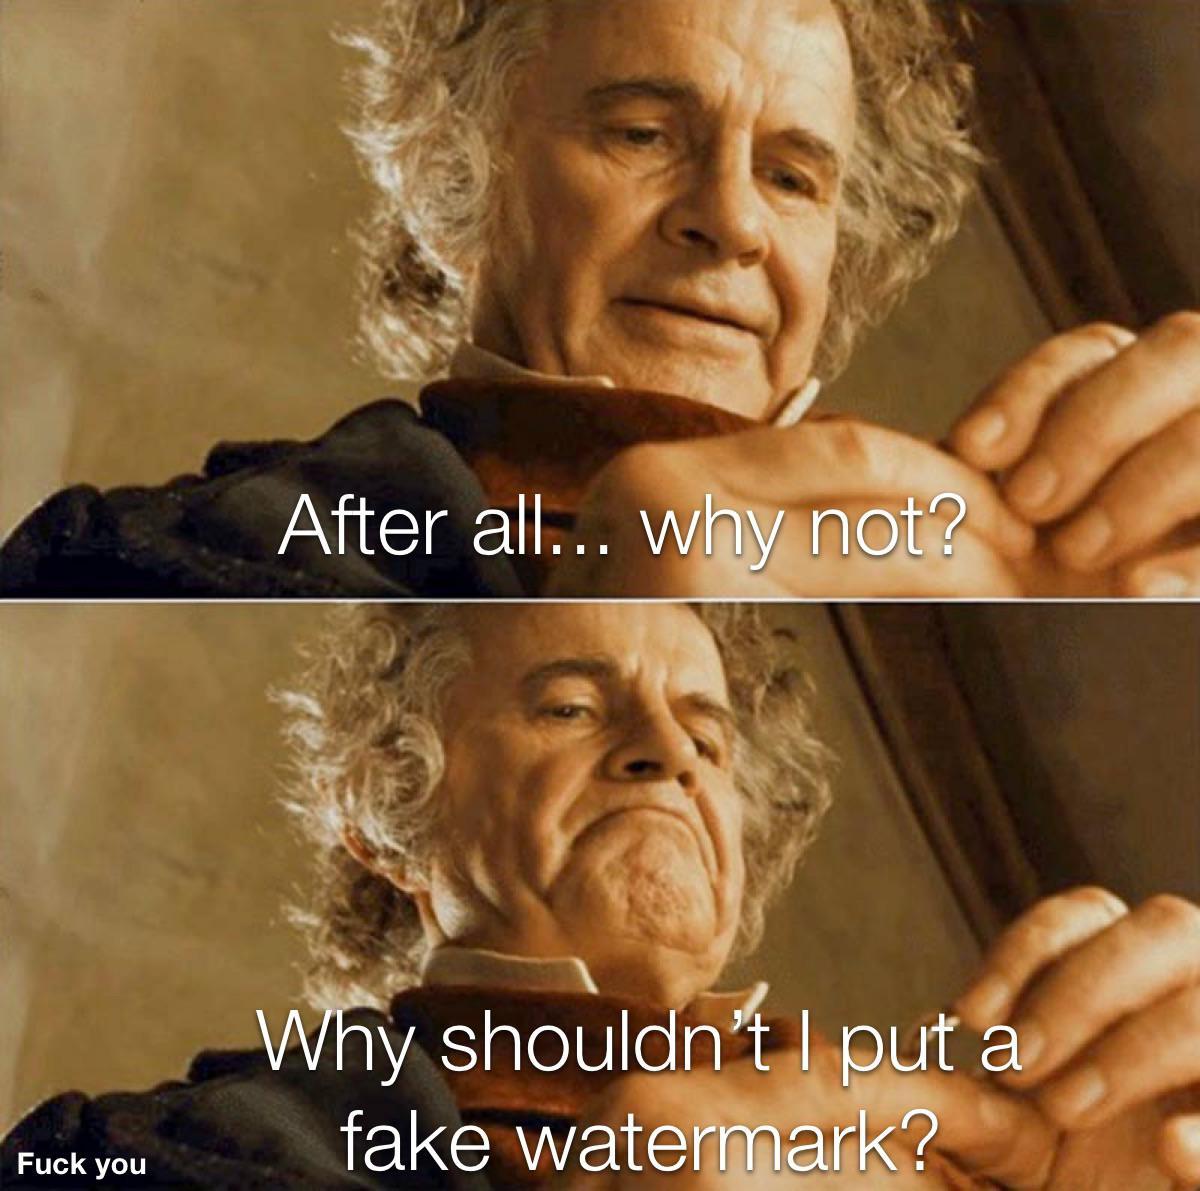 bilbo baggins after all why not meme - after all why shouldn t i post cringe - 2 After all... why not? Why shouldn't I put a fake watermark? Fuck you